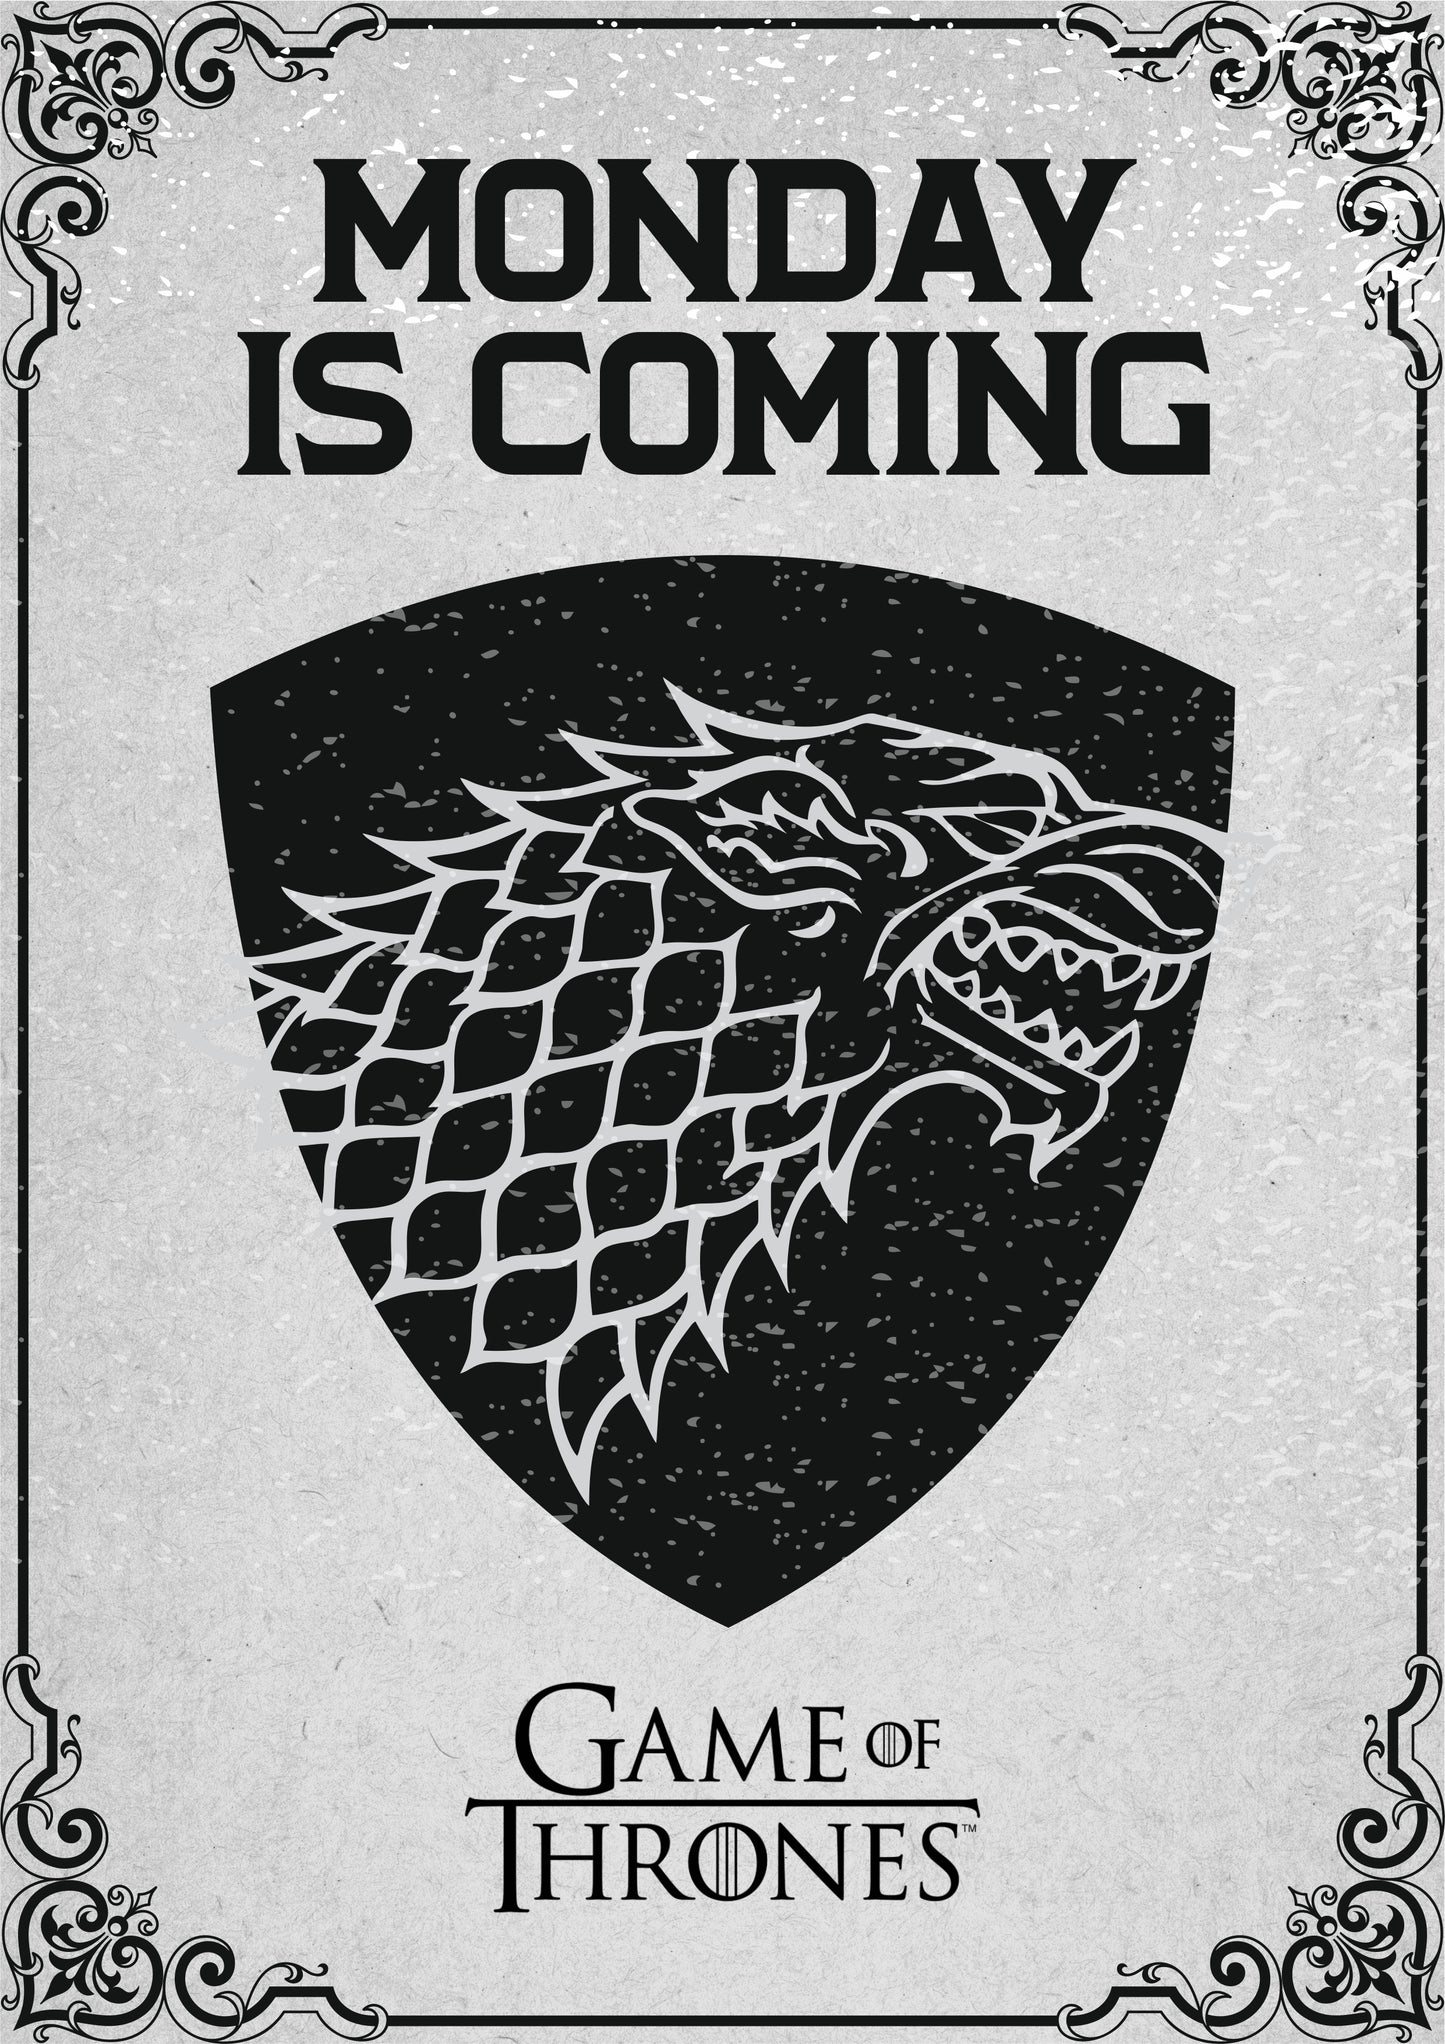 Game of Thrones- Monday is Coming